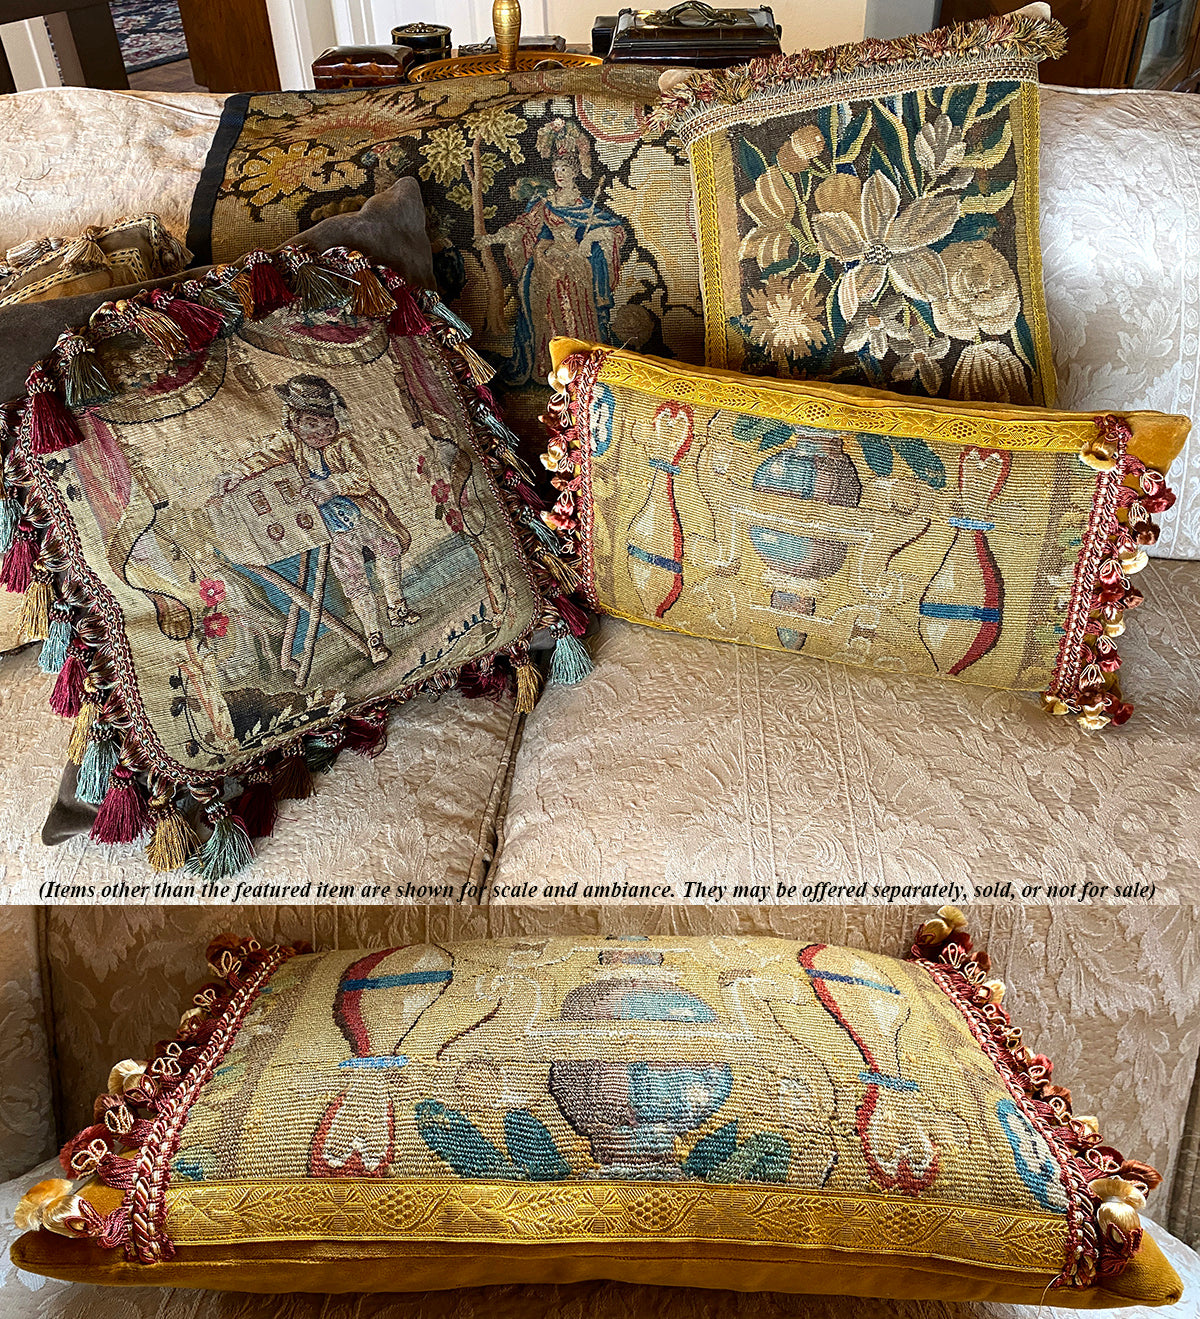 Opulent Antique Aubusson Tapestry Fragment Made as Fine Decorator or Throw Pillow, Passementerie